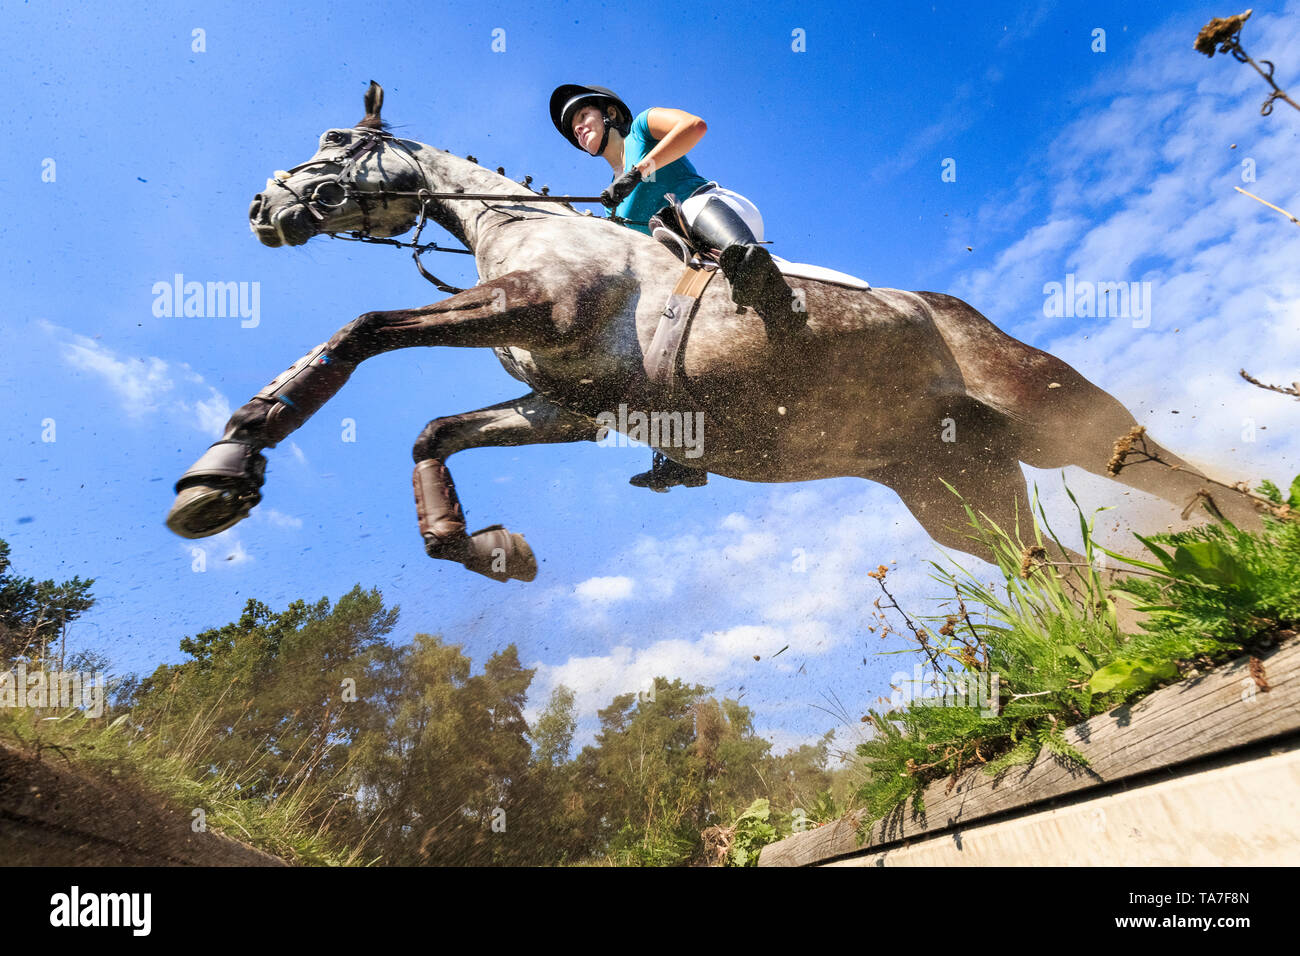 Trakehner. Rider on juvenile grey horse clearing an obstacle during a cross-country ride. Germany Stock Photo